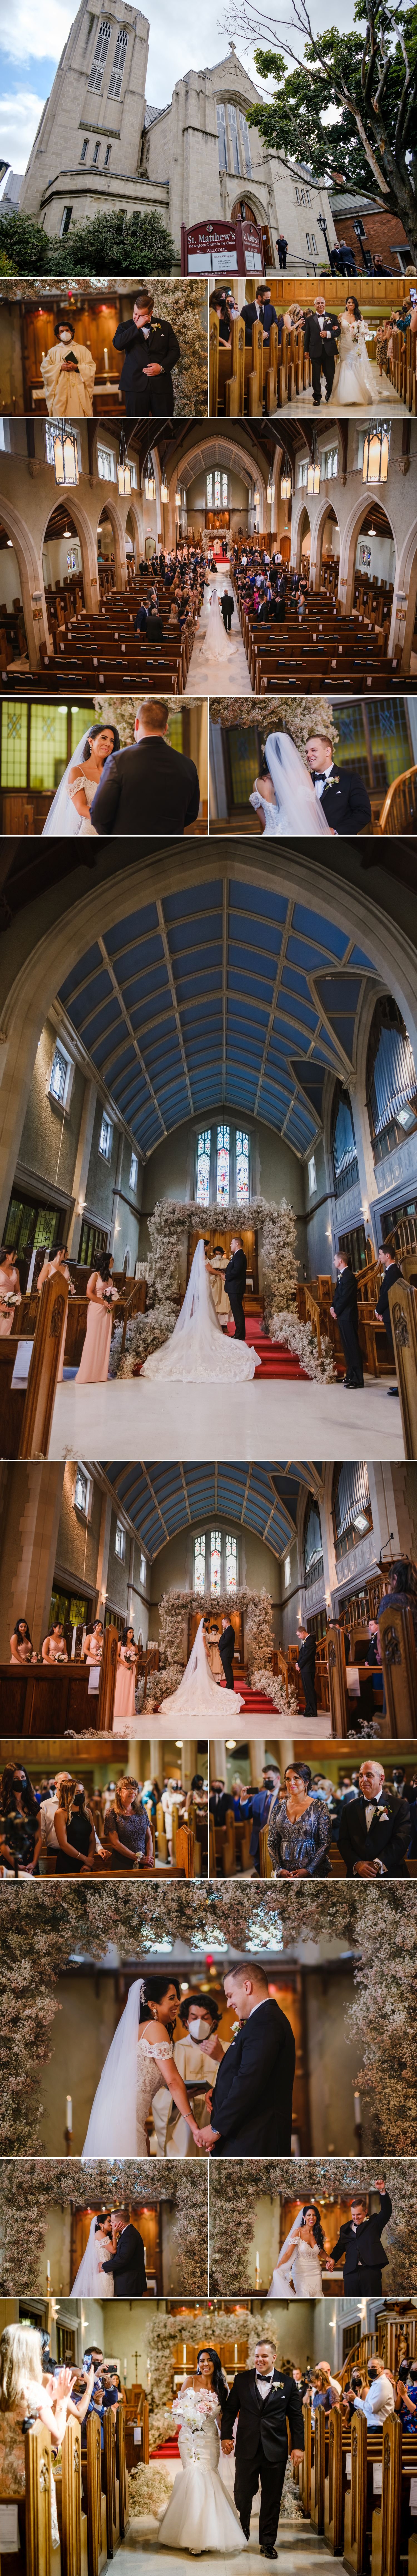 candid moments during a st matthews anglican church wedding ceremony